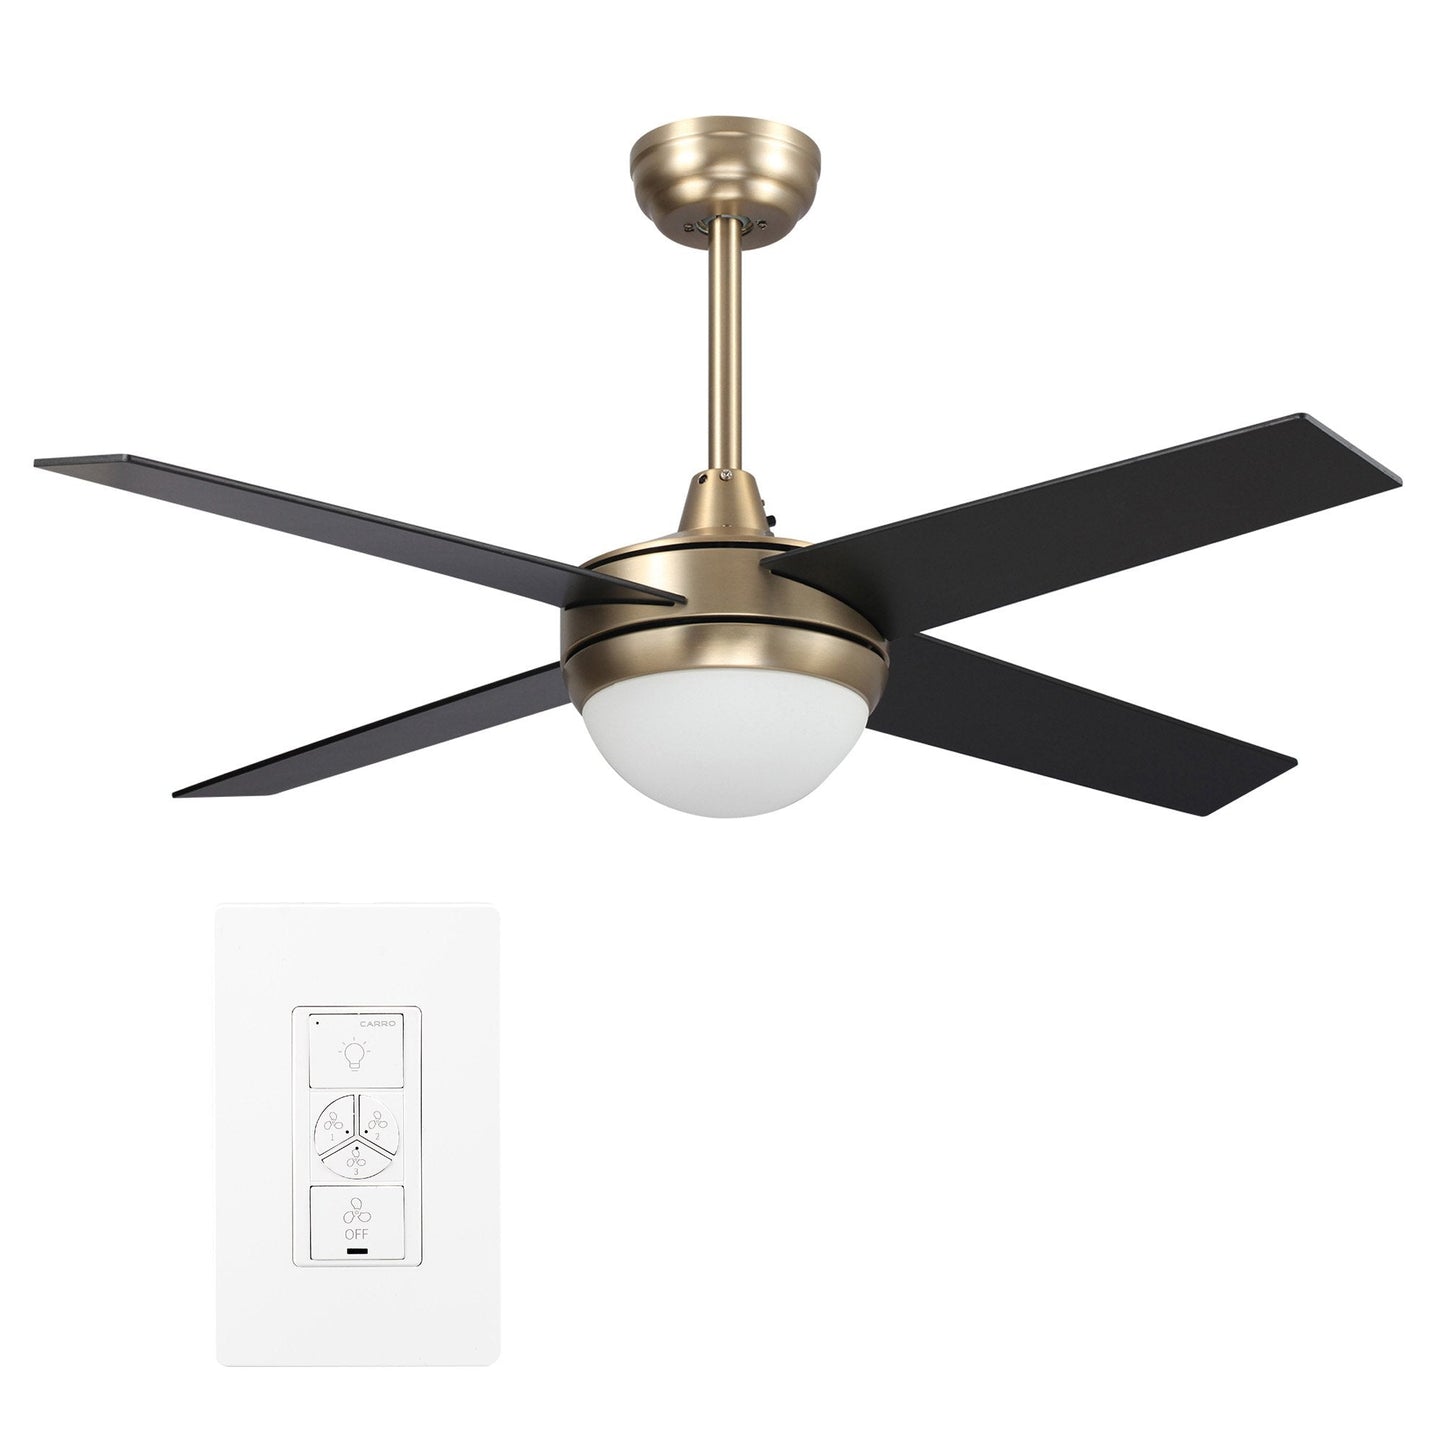 Nova 48-inch Indoor Best Smart Ceiling Fan with LED Light Kit & Wall Control, Works with Alexa/Google Home/Siri